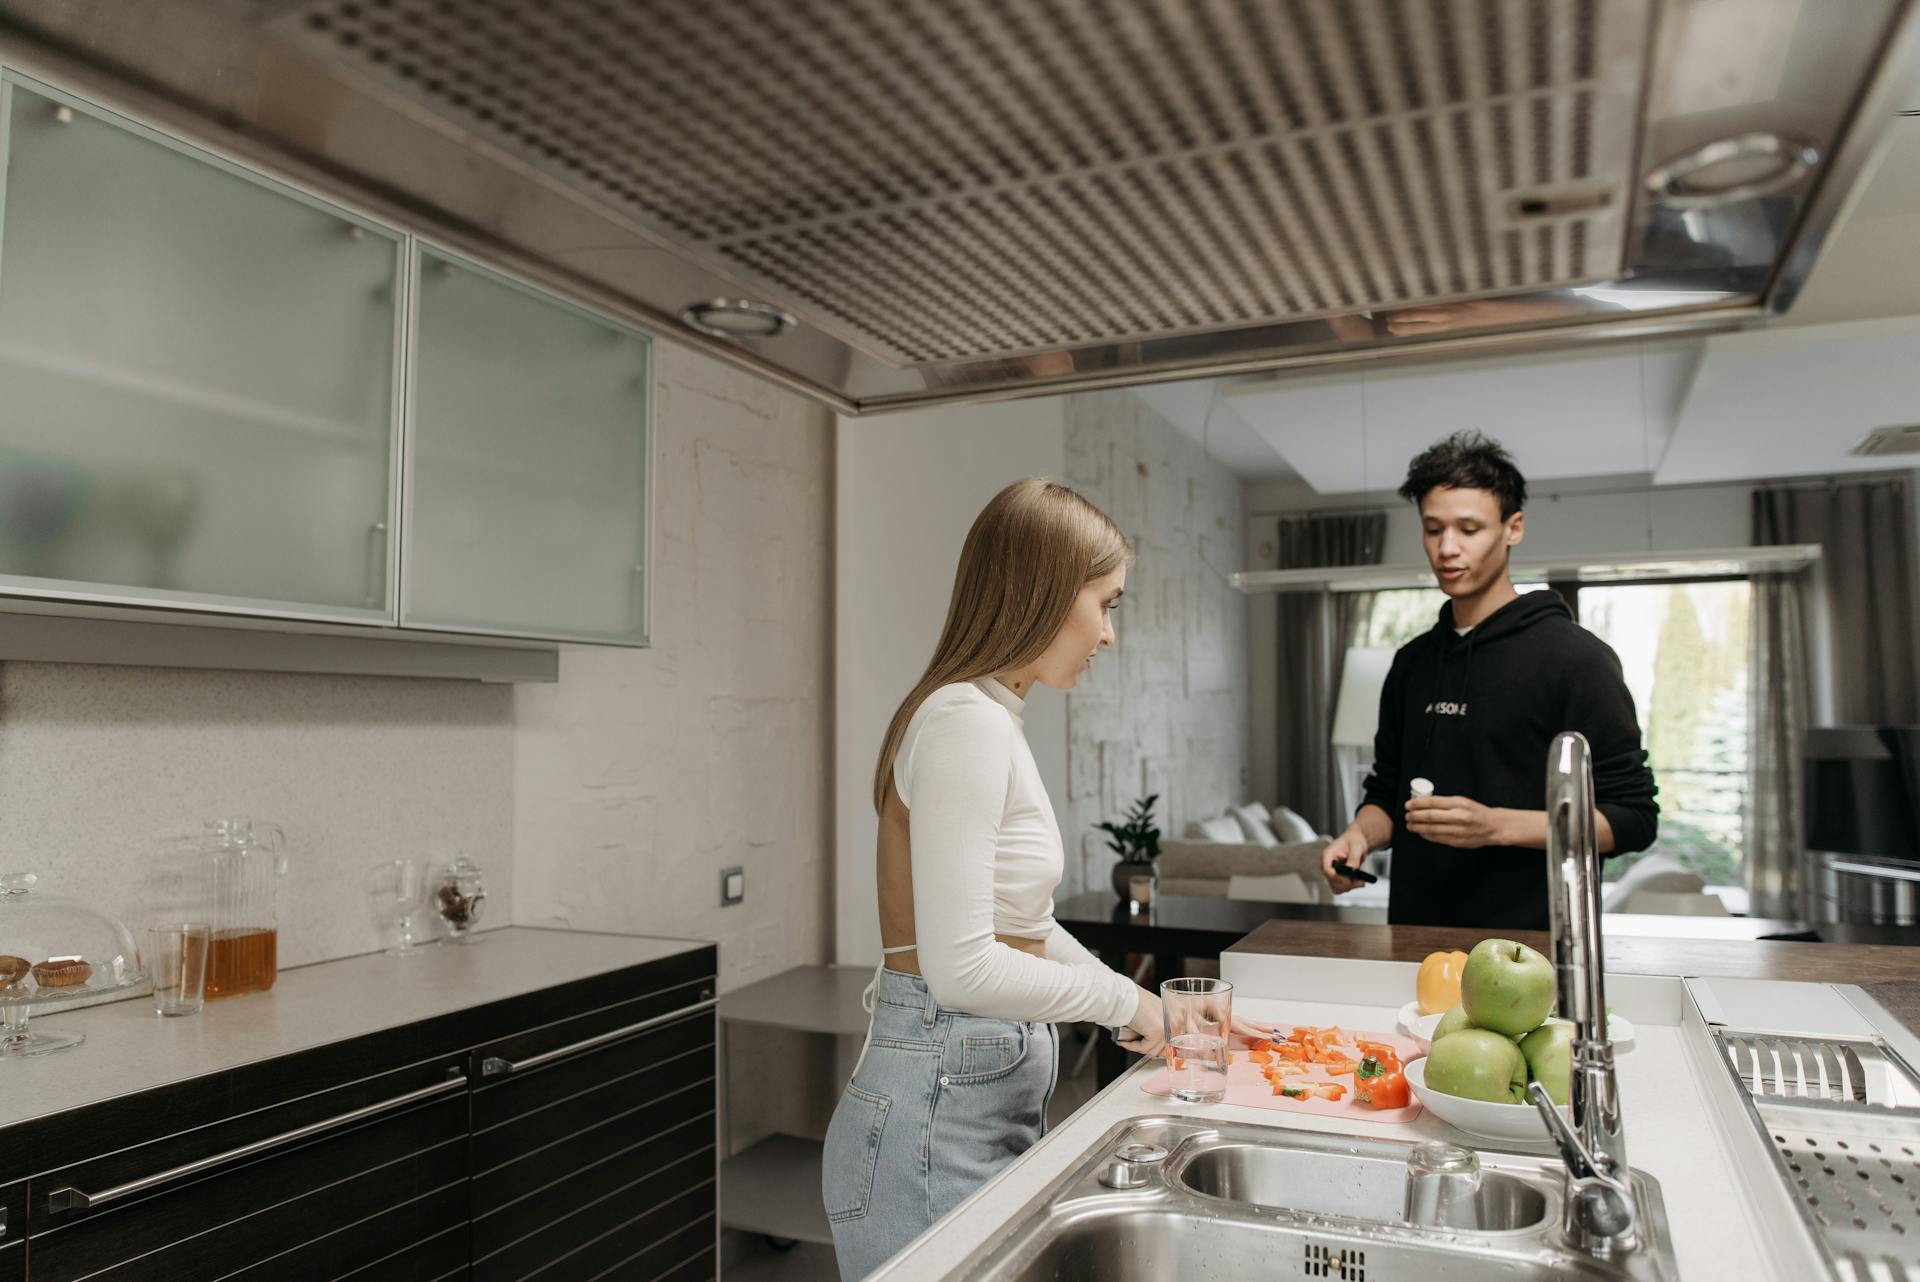 A couple talking in a kitchen | Source: Pexels